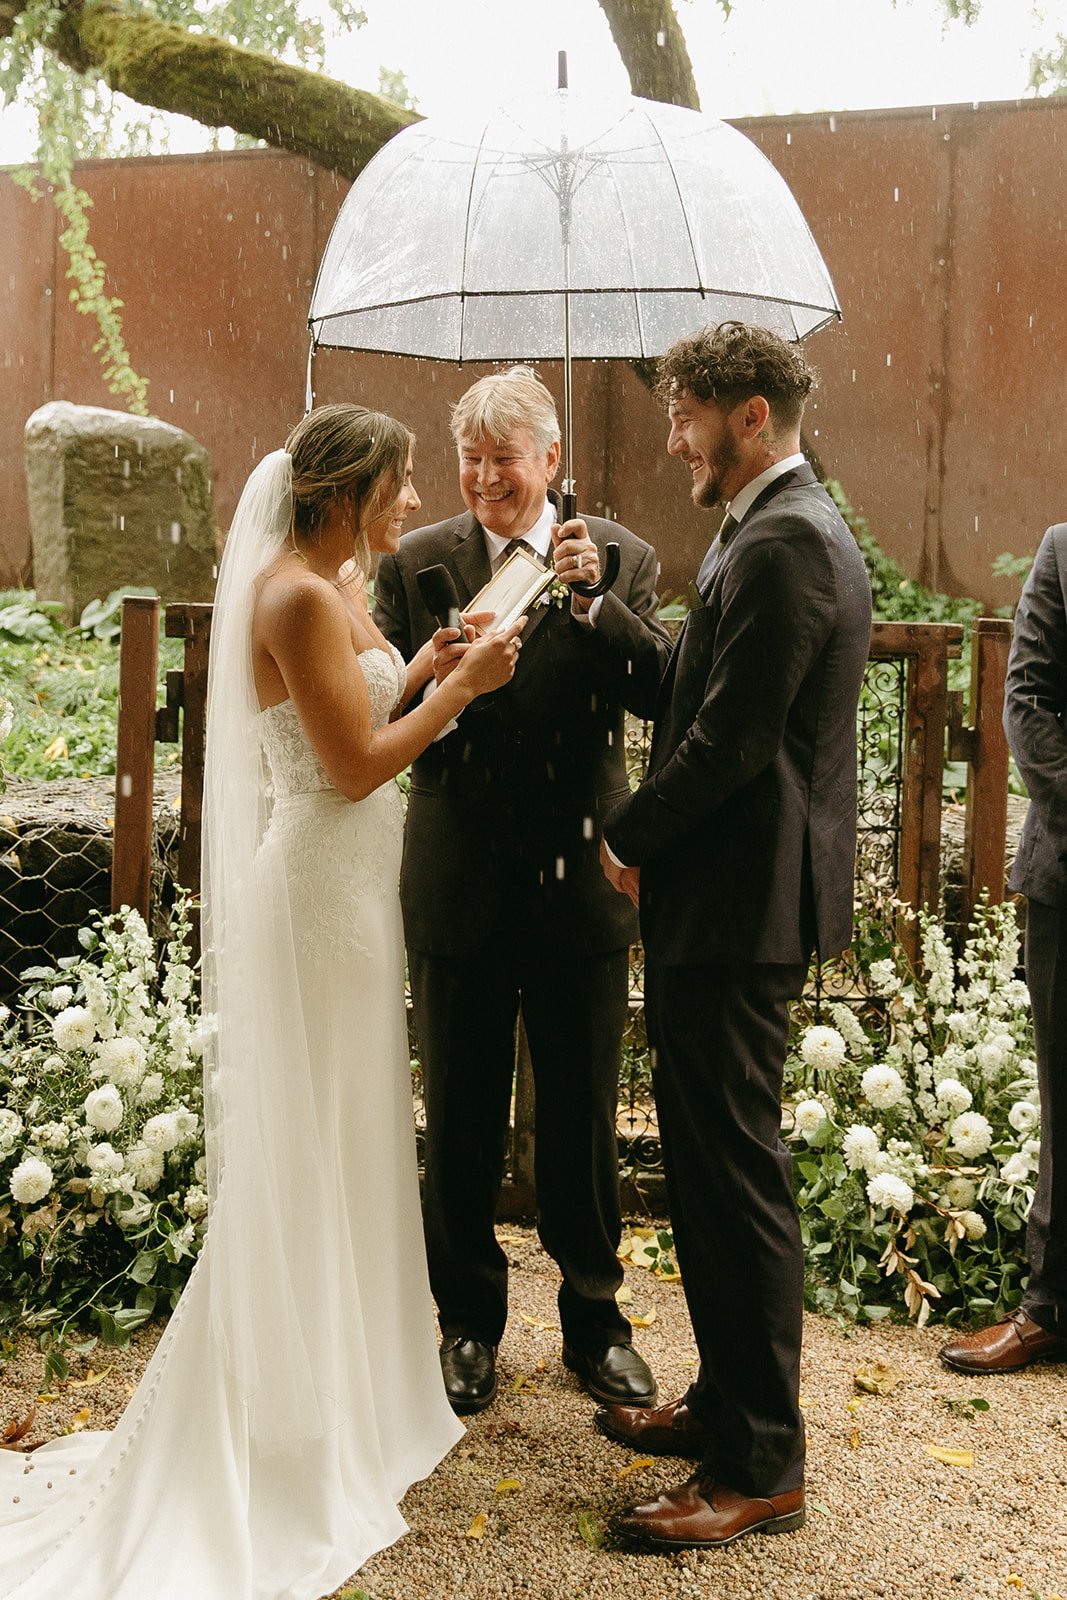 Bride and groom exchanging vows in the rain